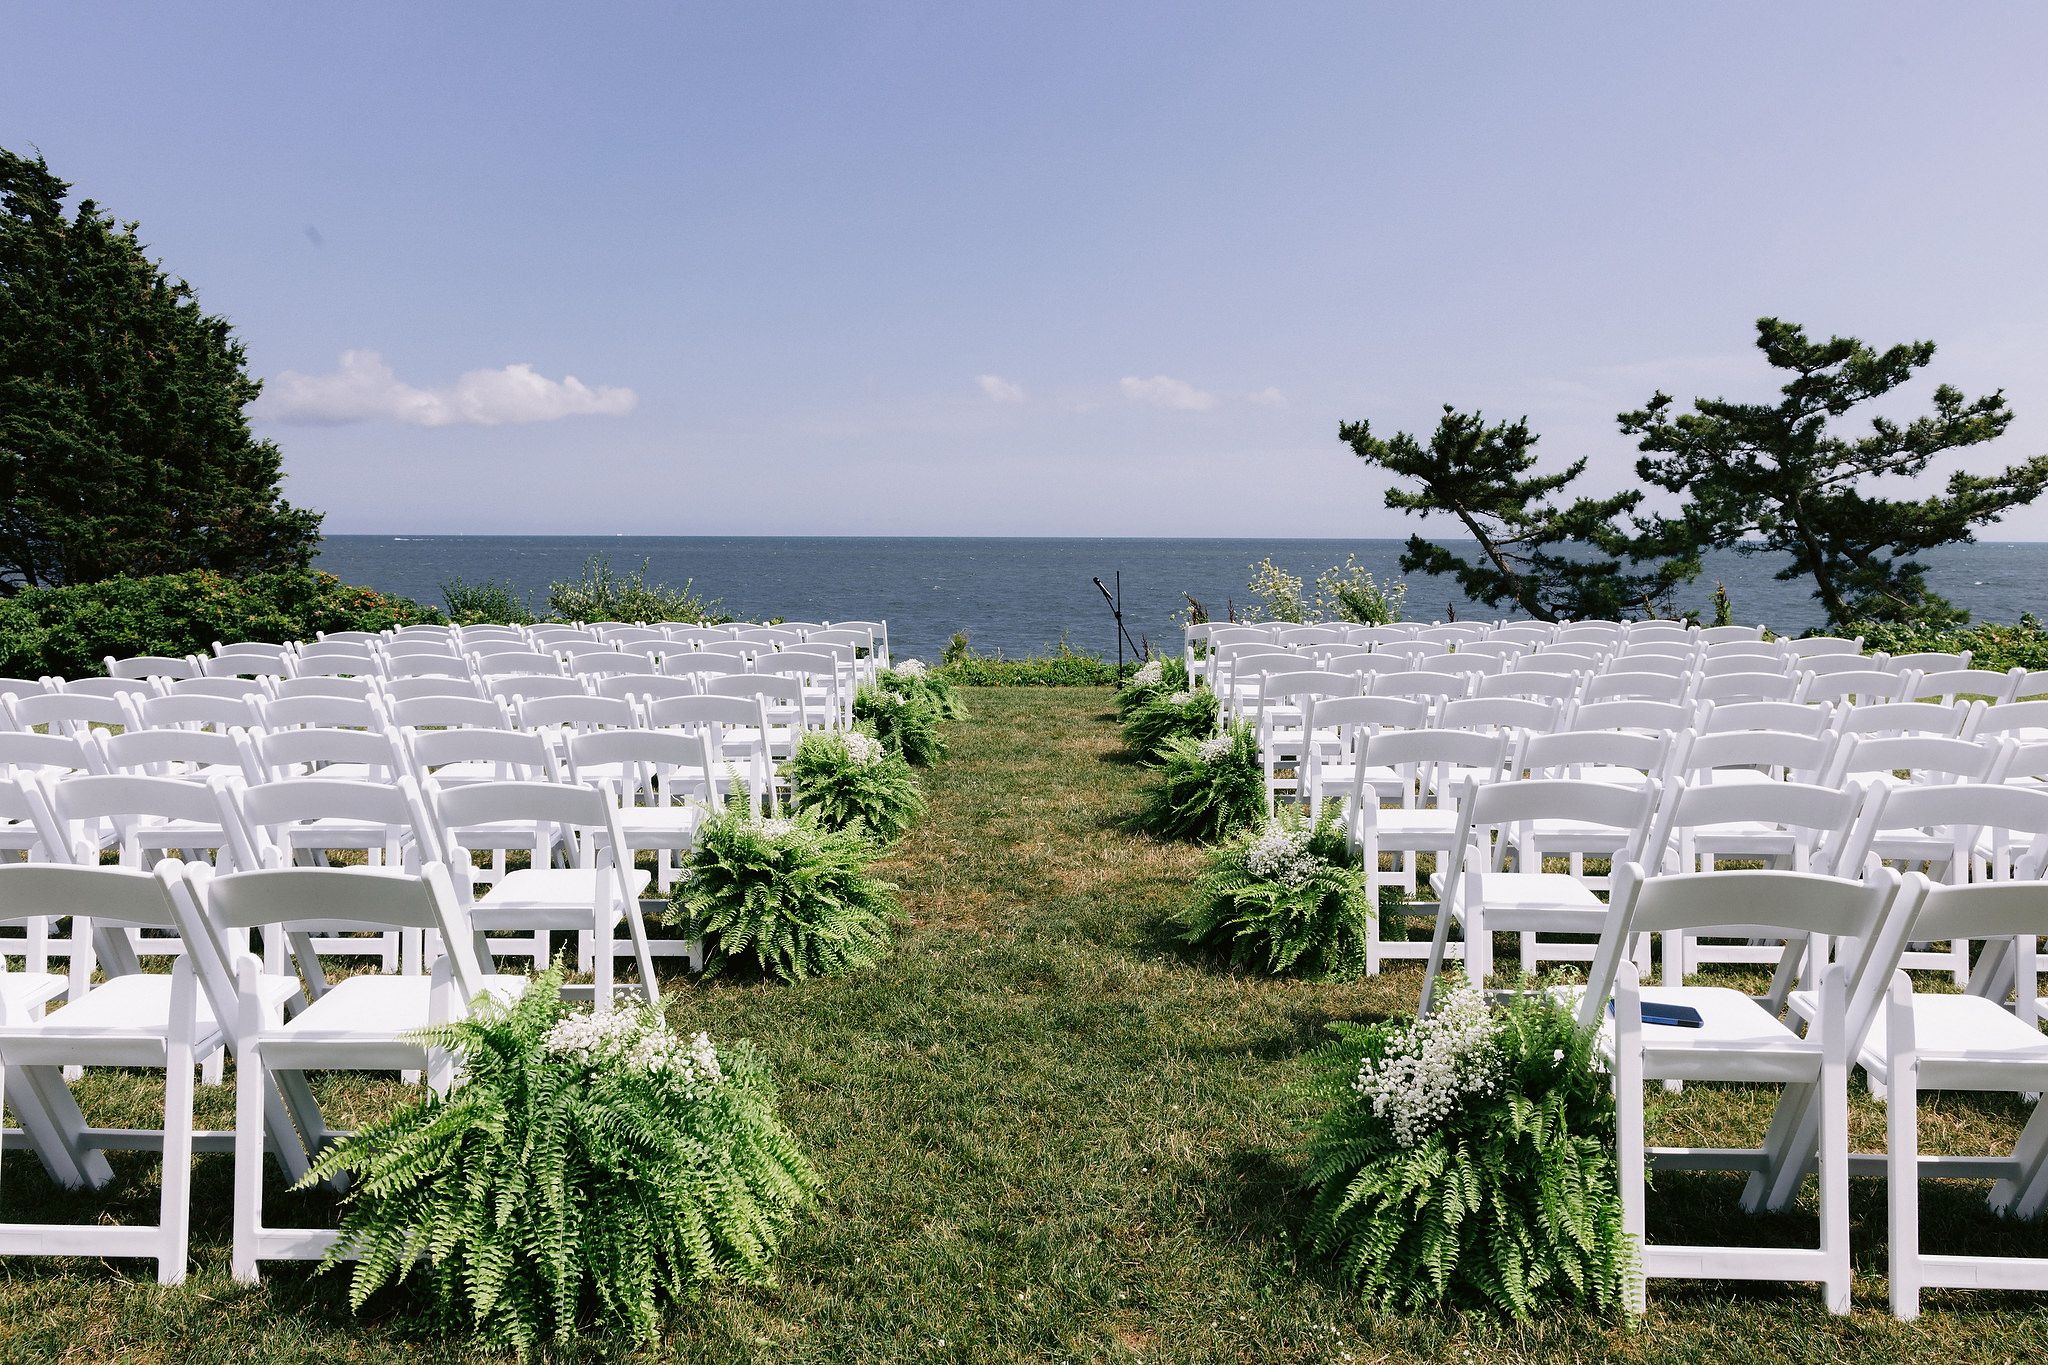 A wedding ceremony set-up with ocean view at Wianno Club, Cape Cod, Osterville, MA. Beach wedding venue image by Jenny Fu Studio